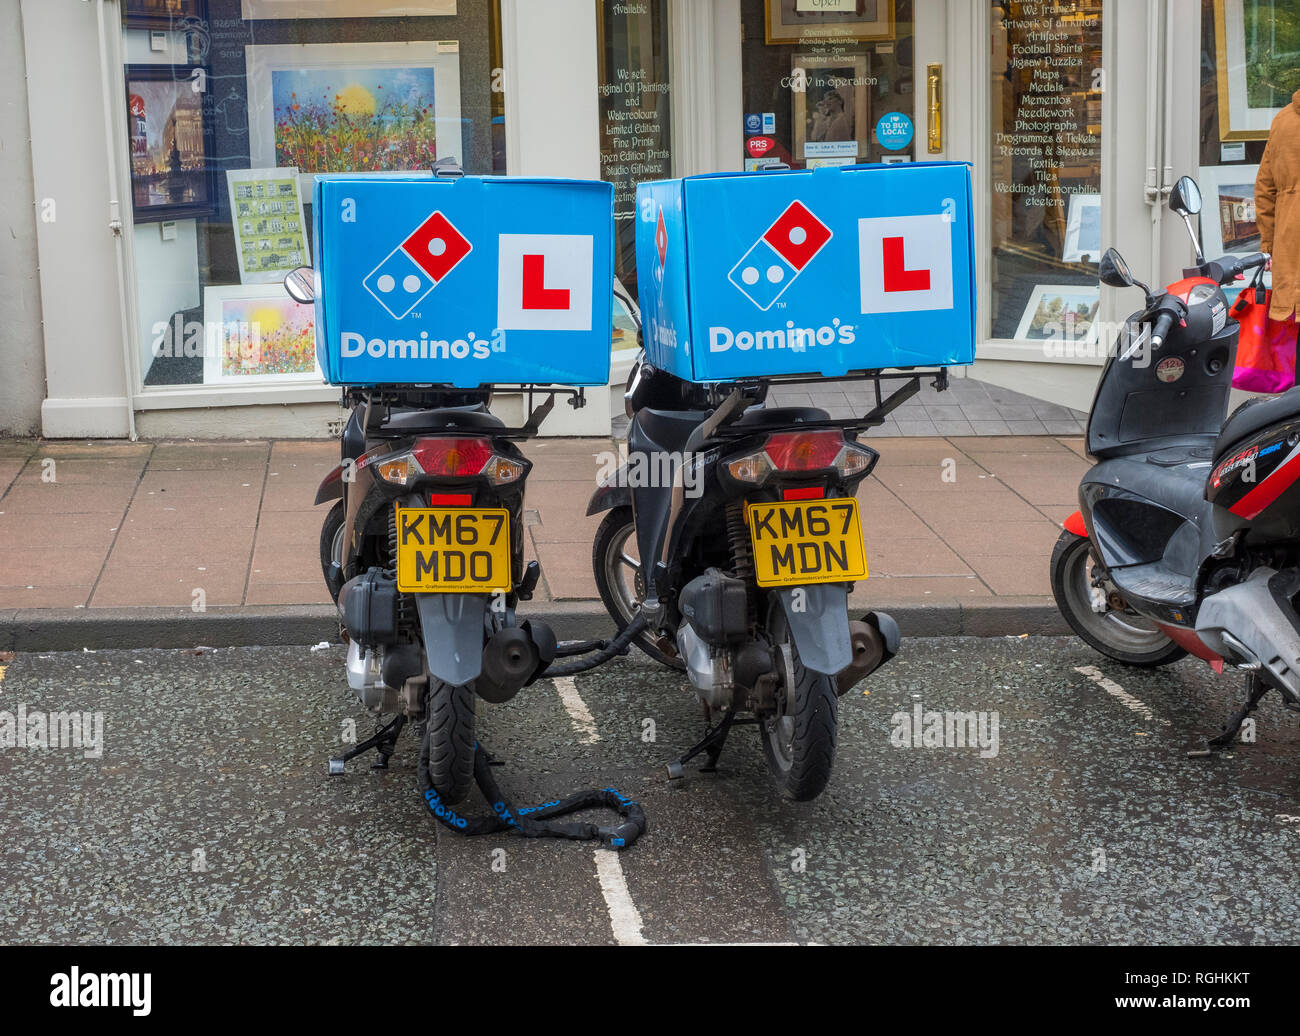 Two Domino's Pizza delivery bikes parked in Shrewsbury, Shropshire, England, UK Stock Photo